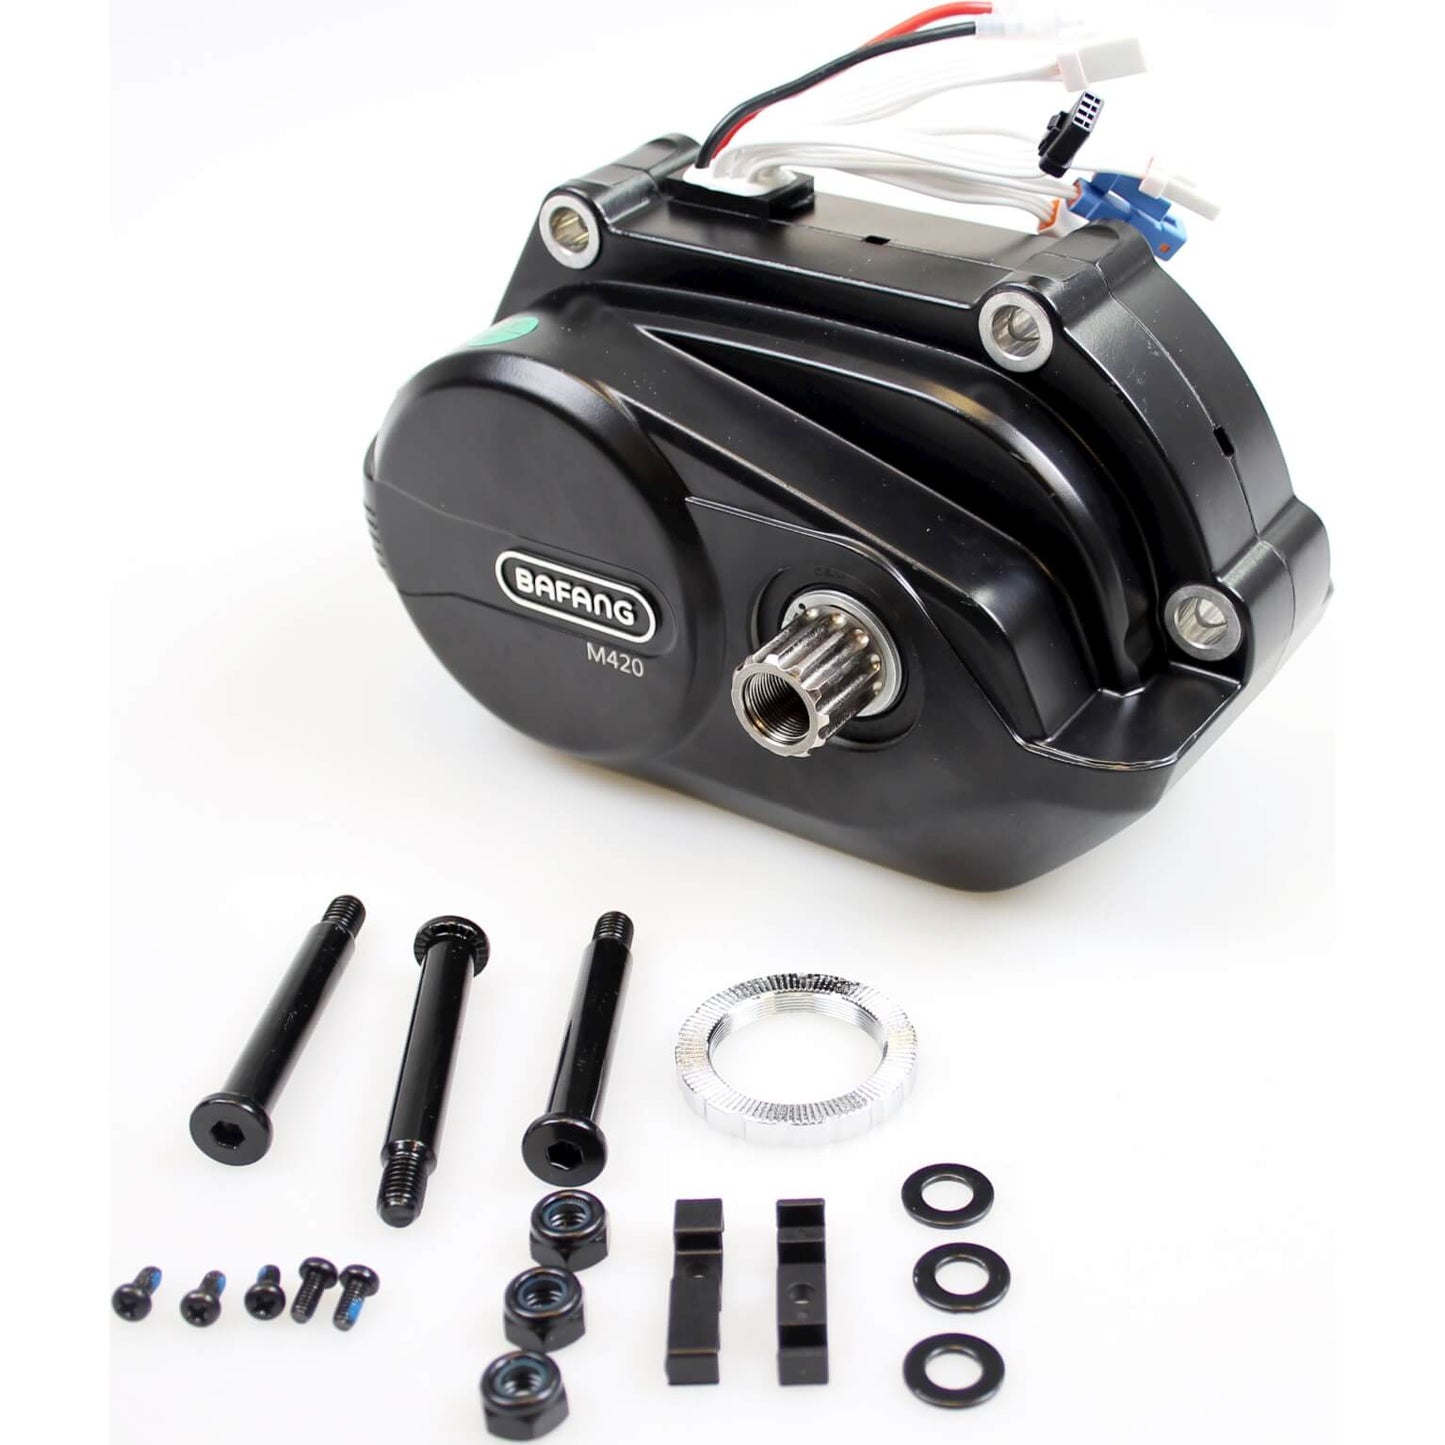 Bafang Gear Drive M420 Middle Motor 43V 250W (calvo) CAN